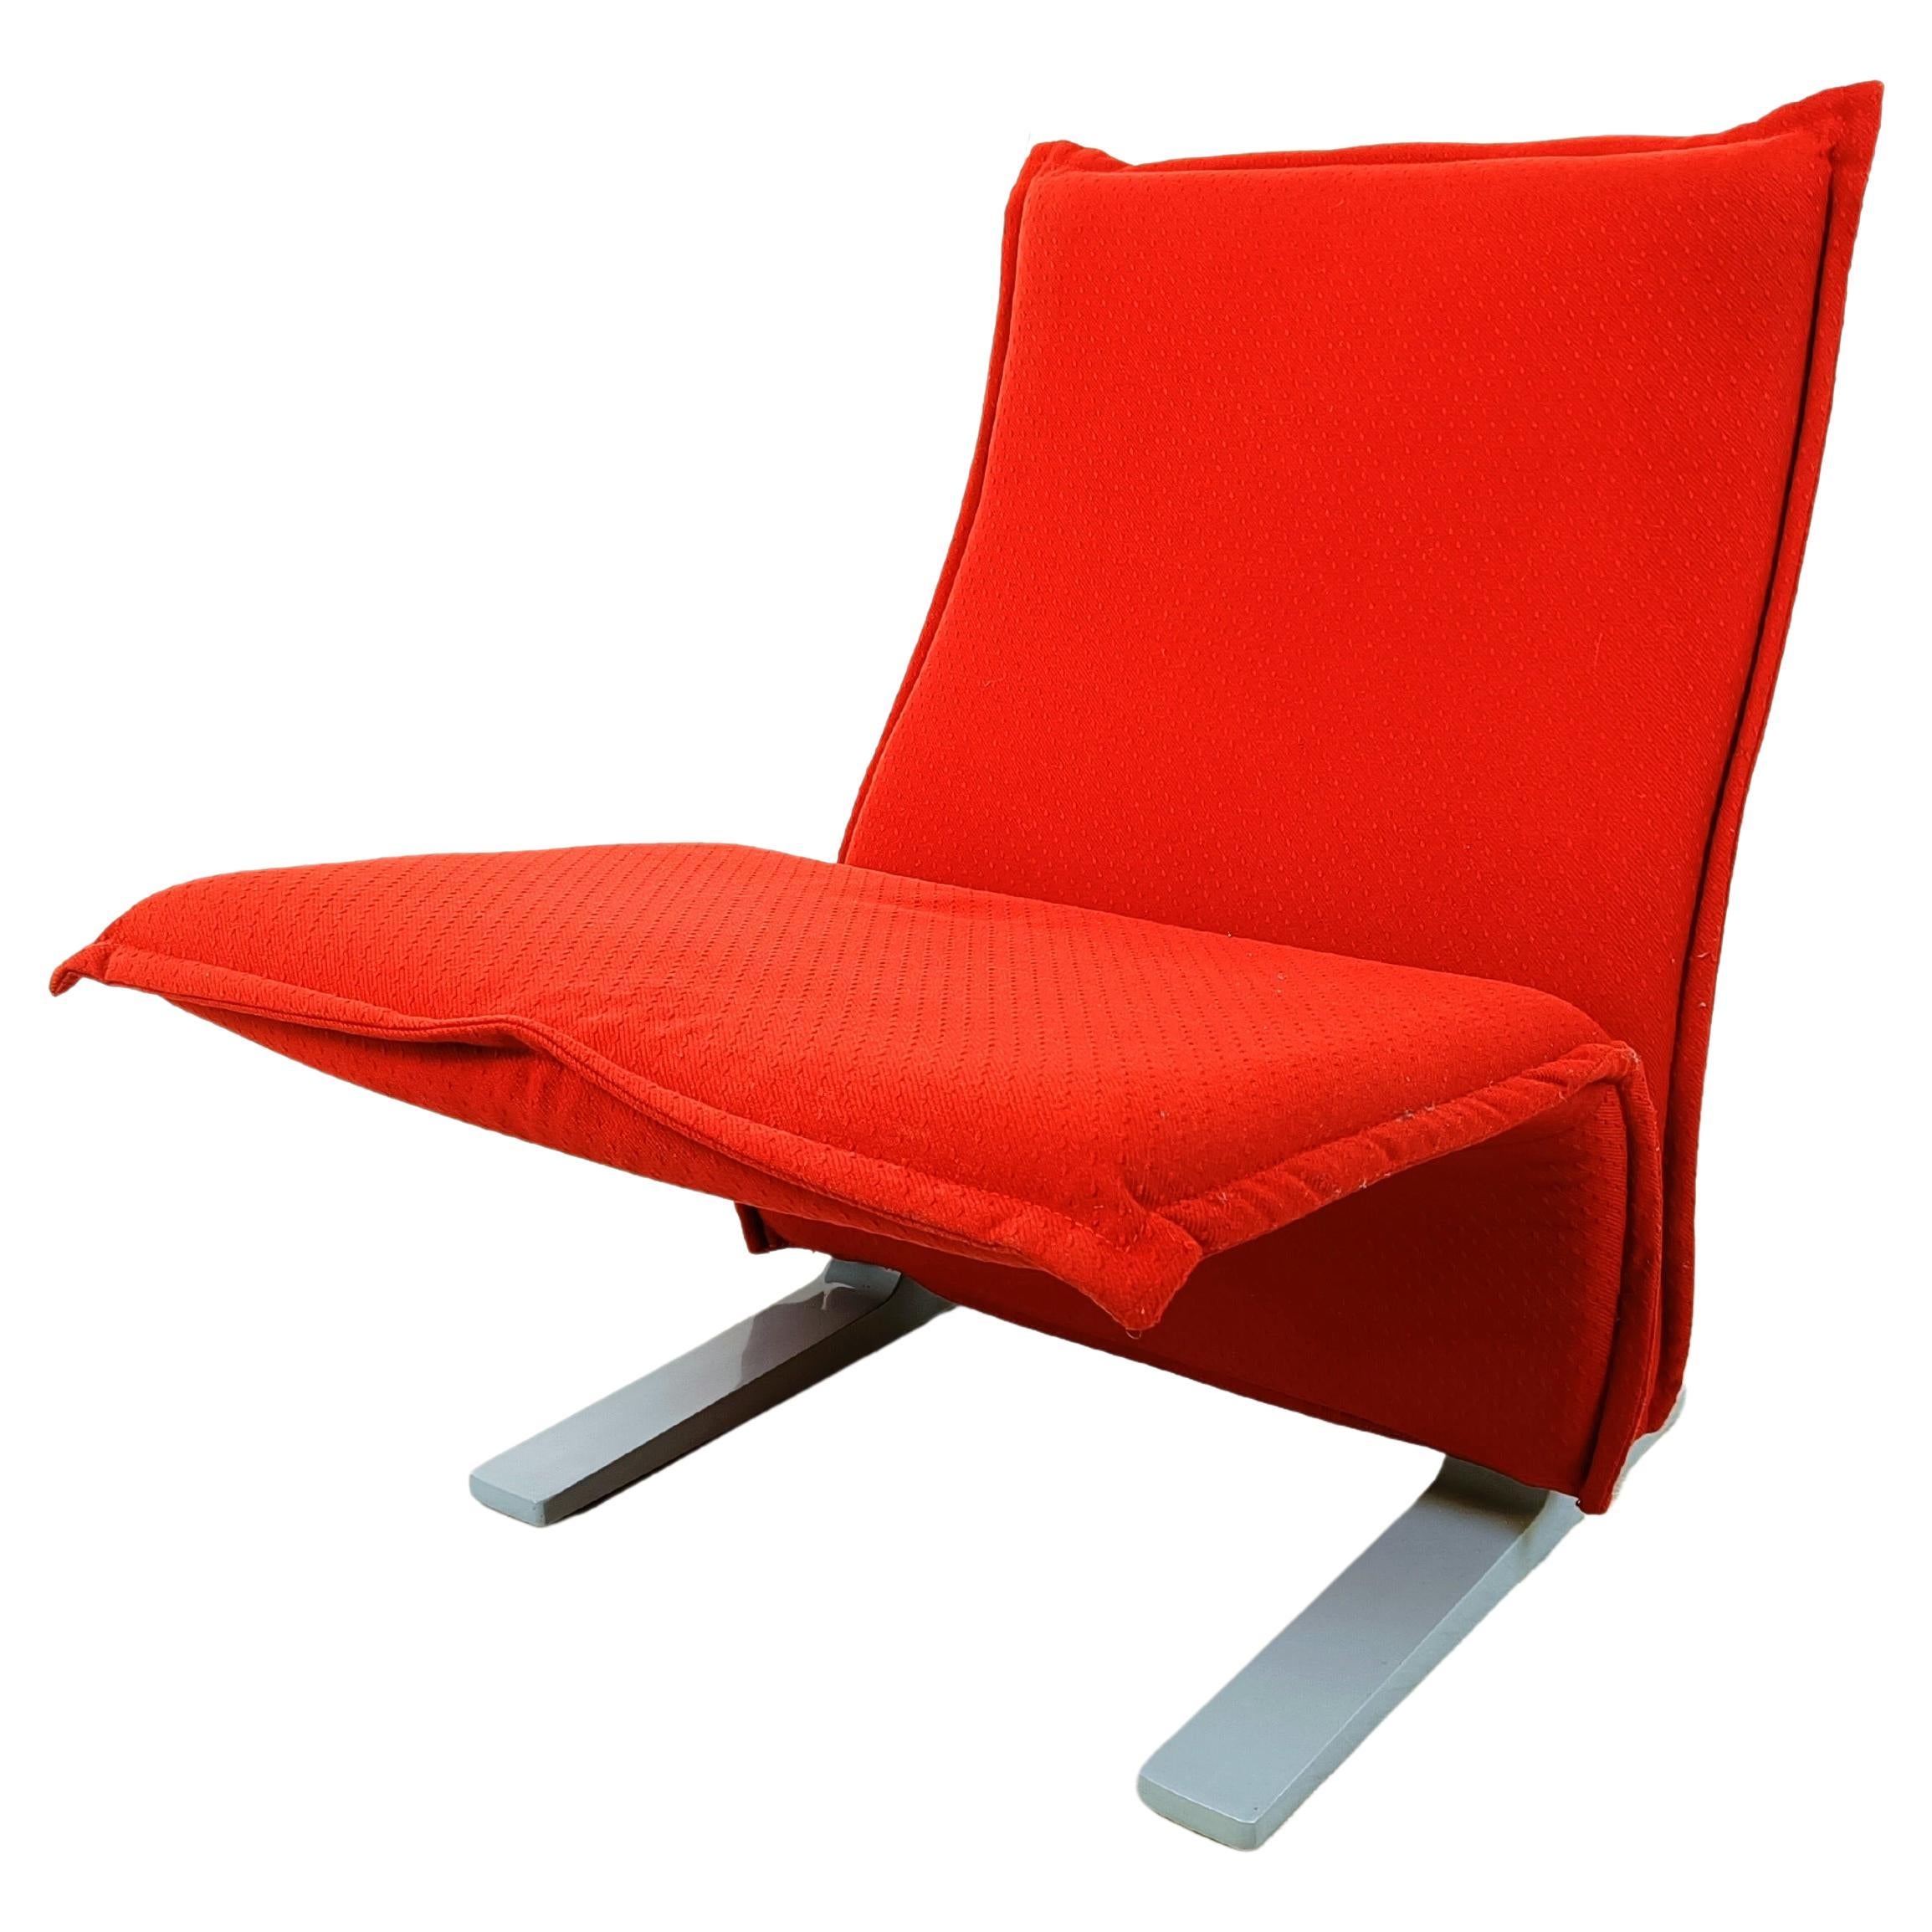 Pierre Paulin Concorde F784 chair, 1970s For Sale